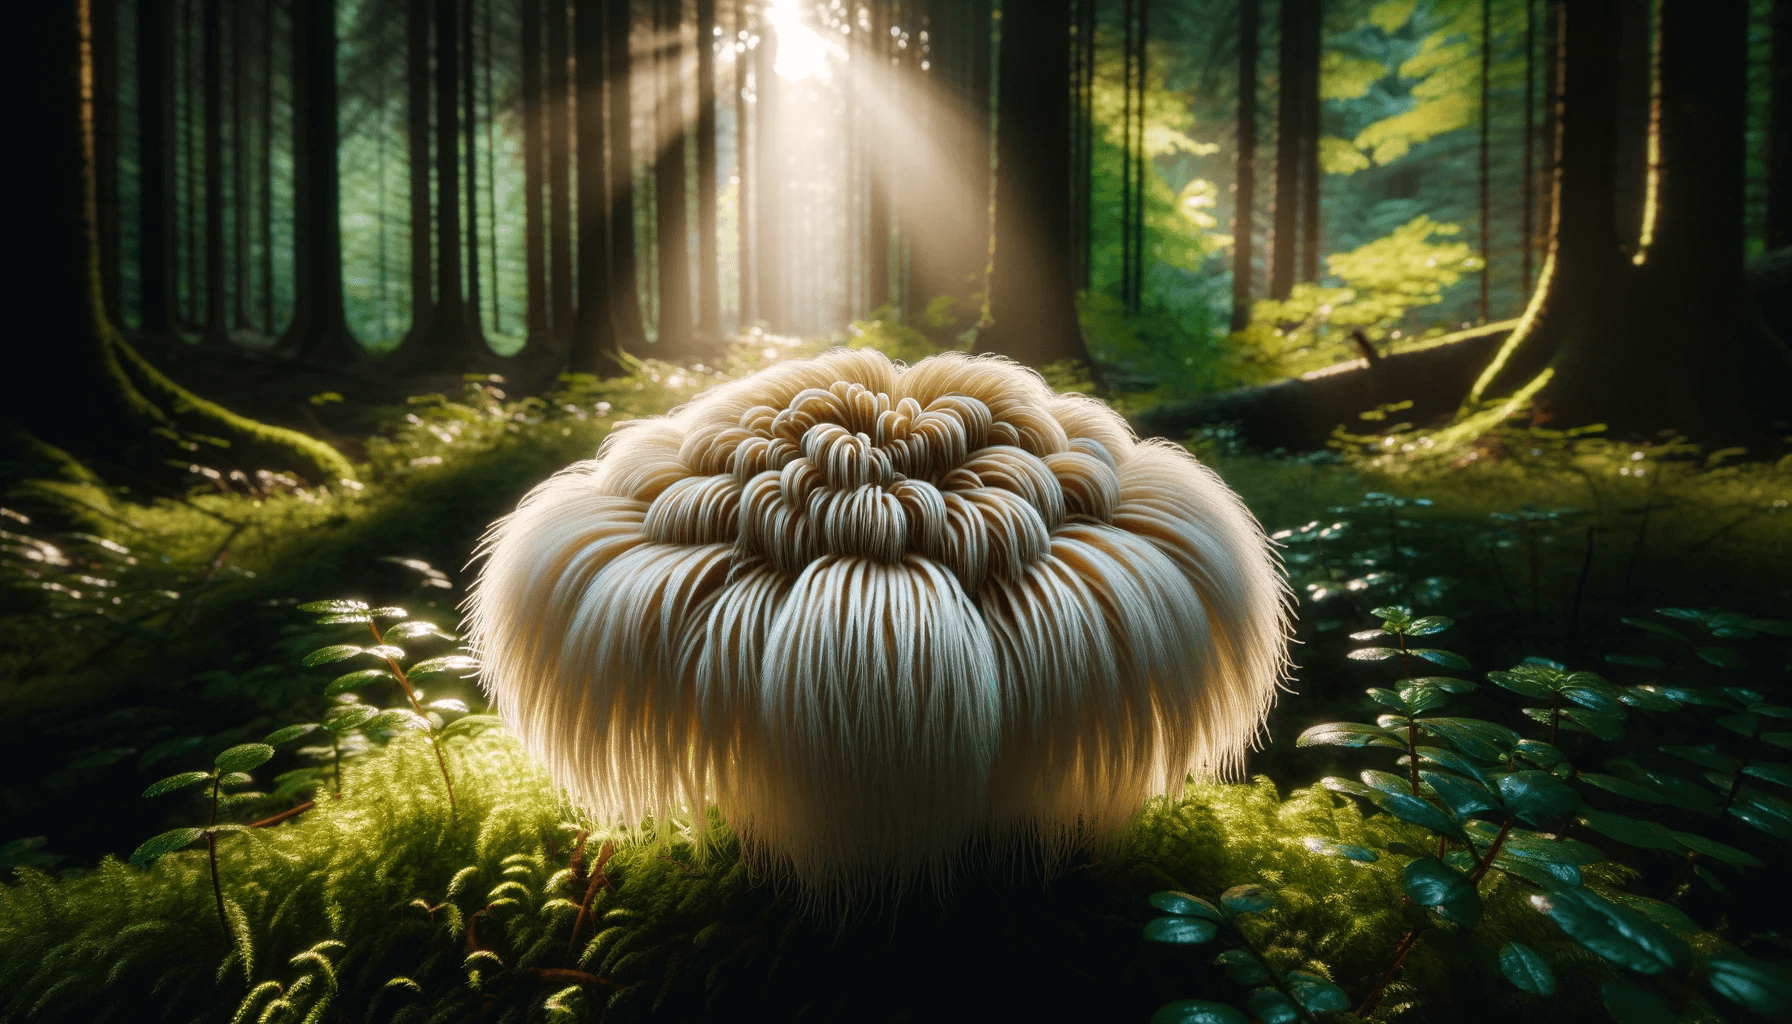 Lion's Mane mushroom in a forest setting, highlighting the natural source of the cognitive-enhancing supplement